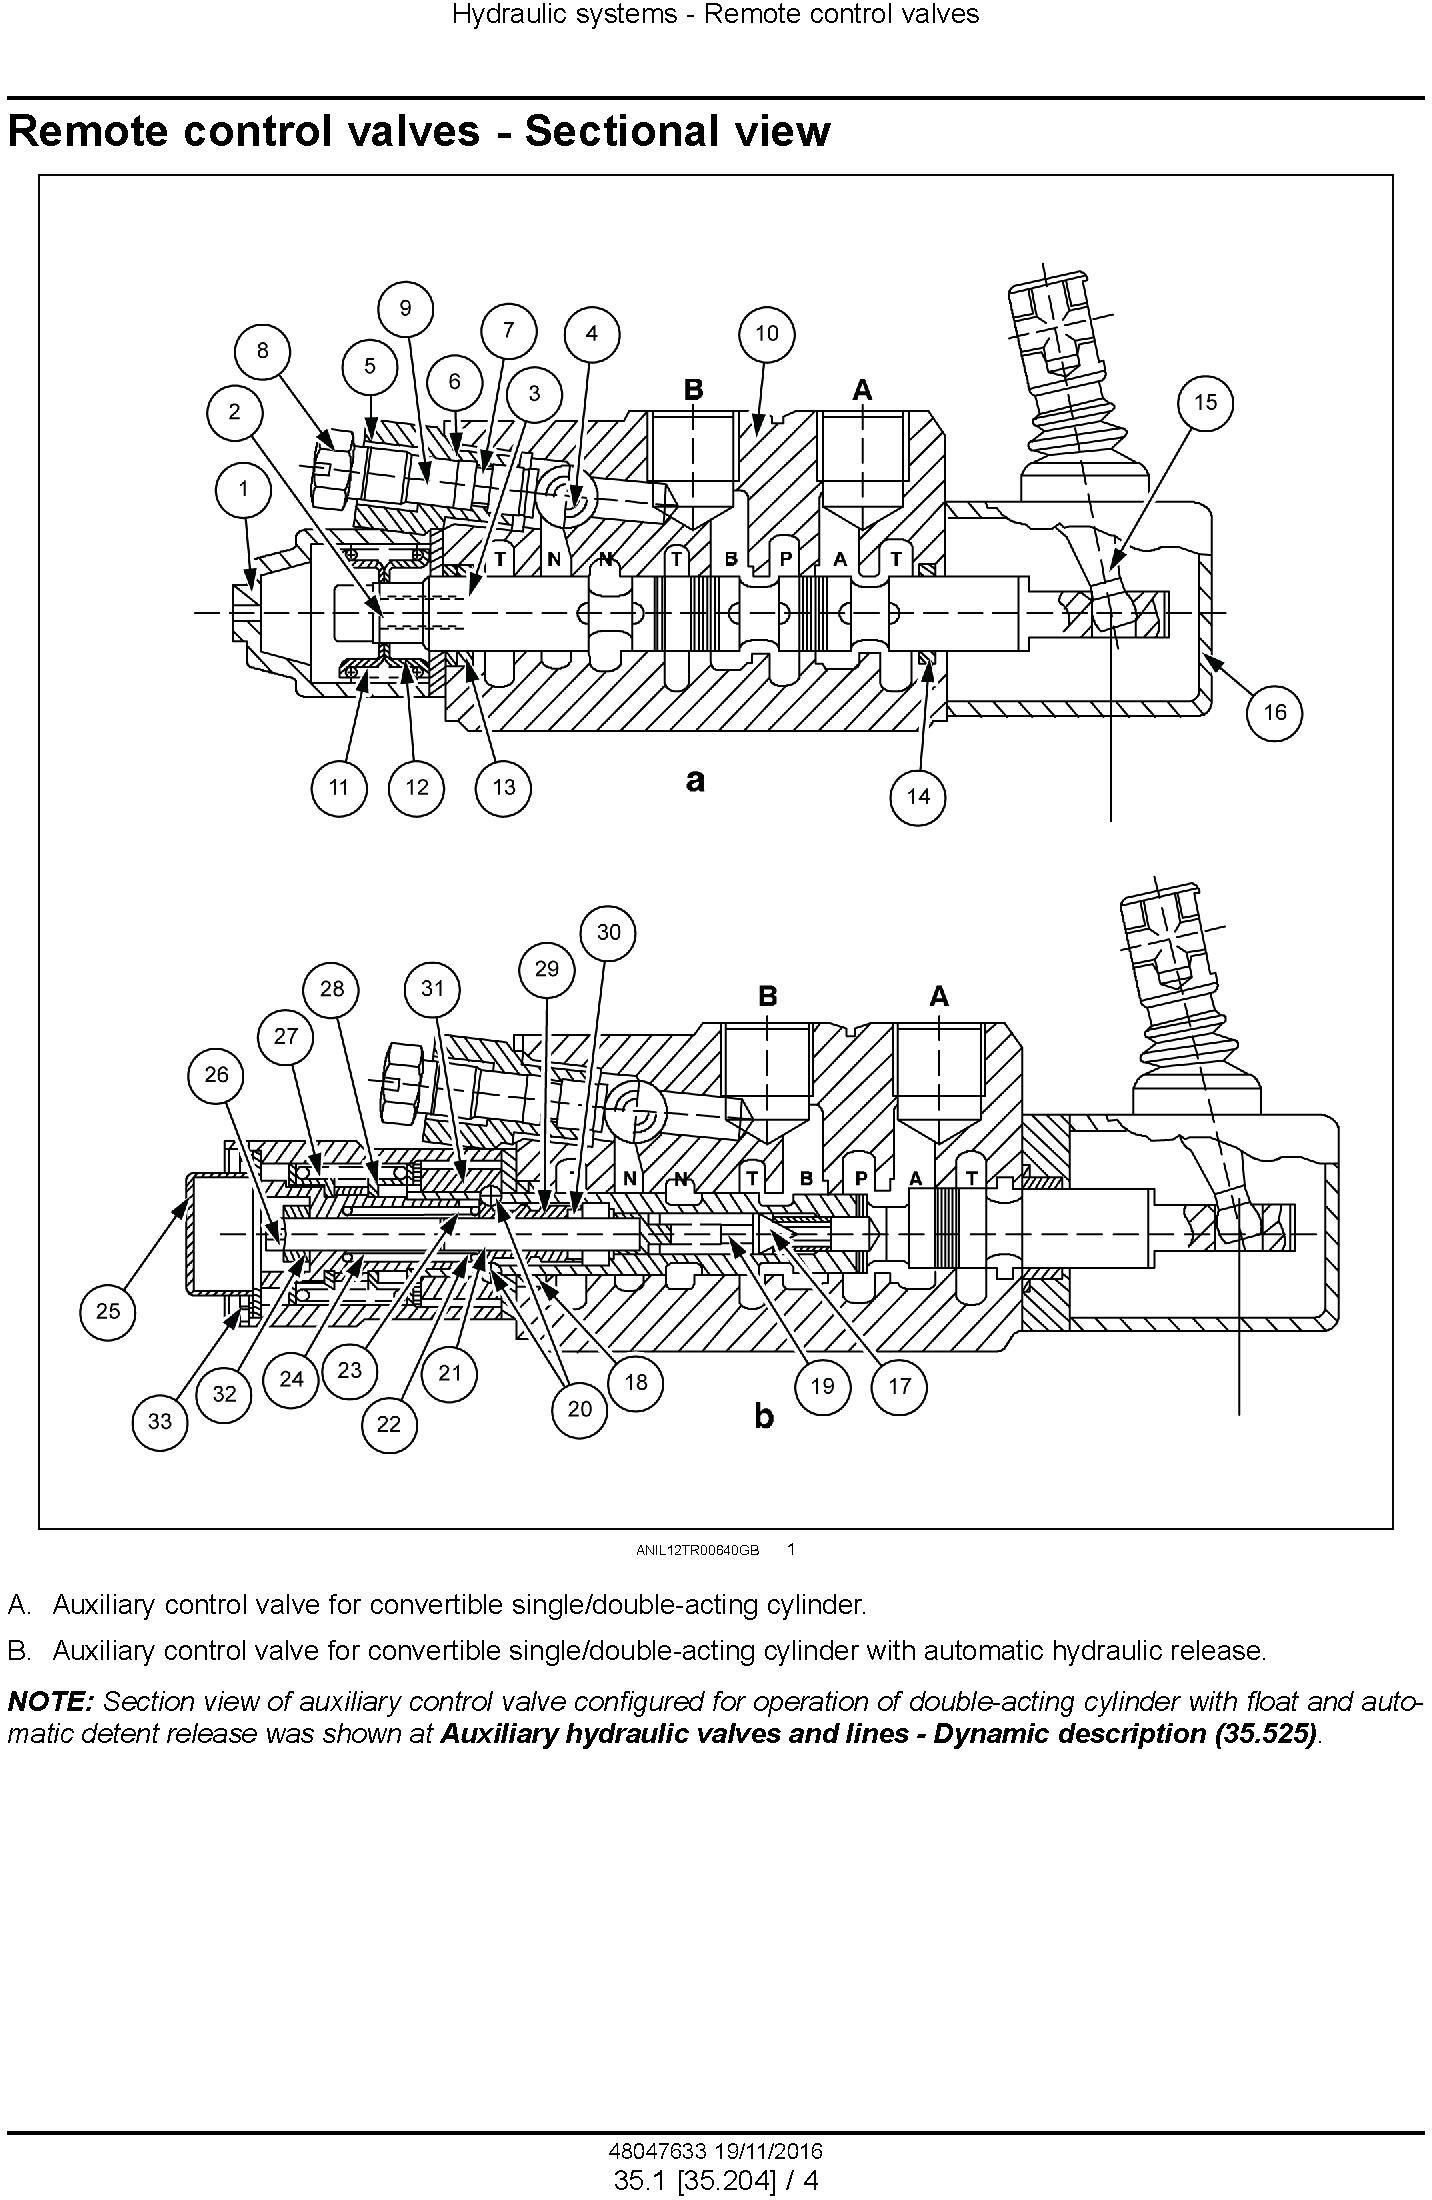 New Holland TD60, TD70, TD80, TD90, TD95 Straddle Tractor Service Manual (Asia, Africa) - 3